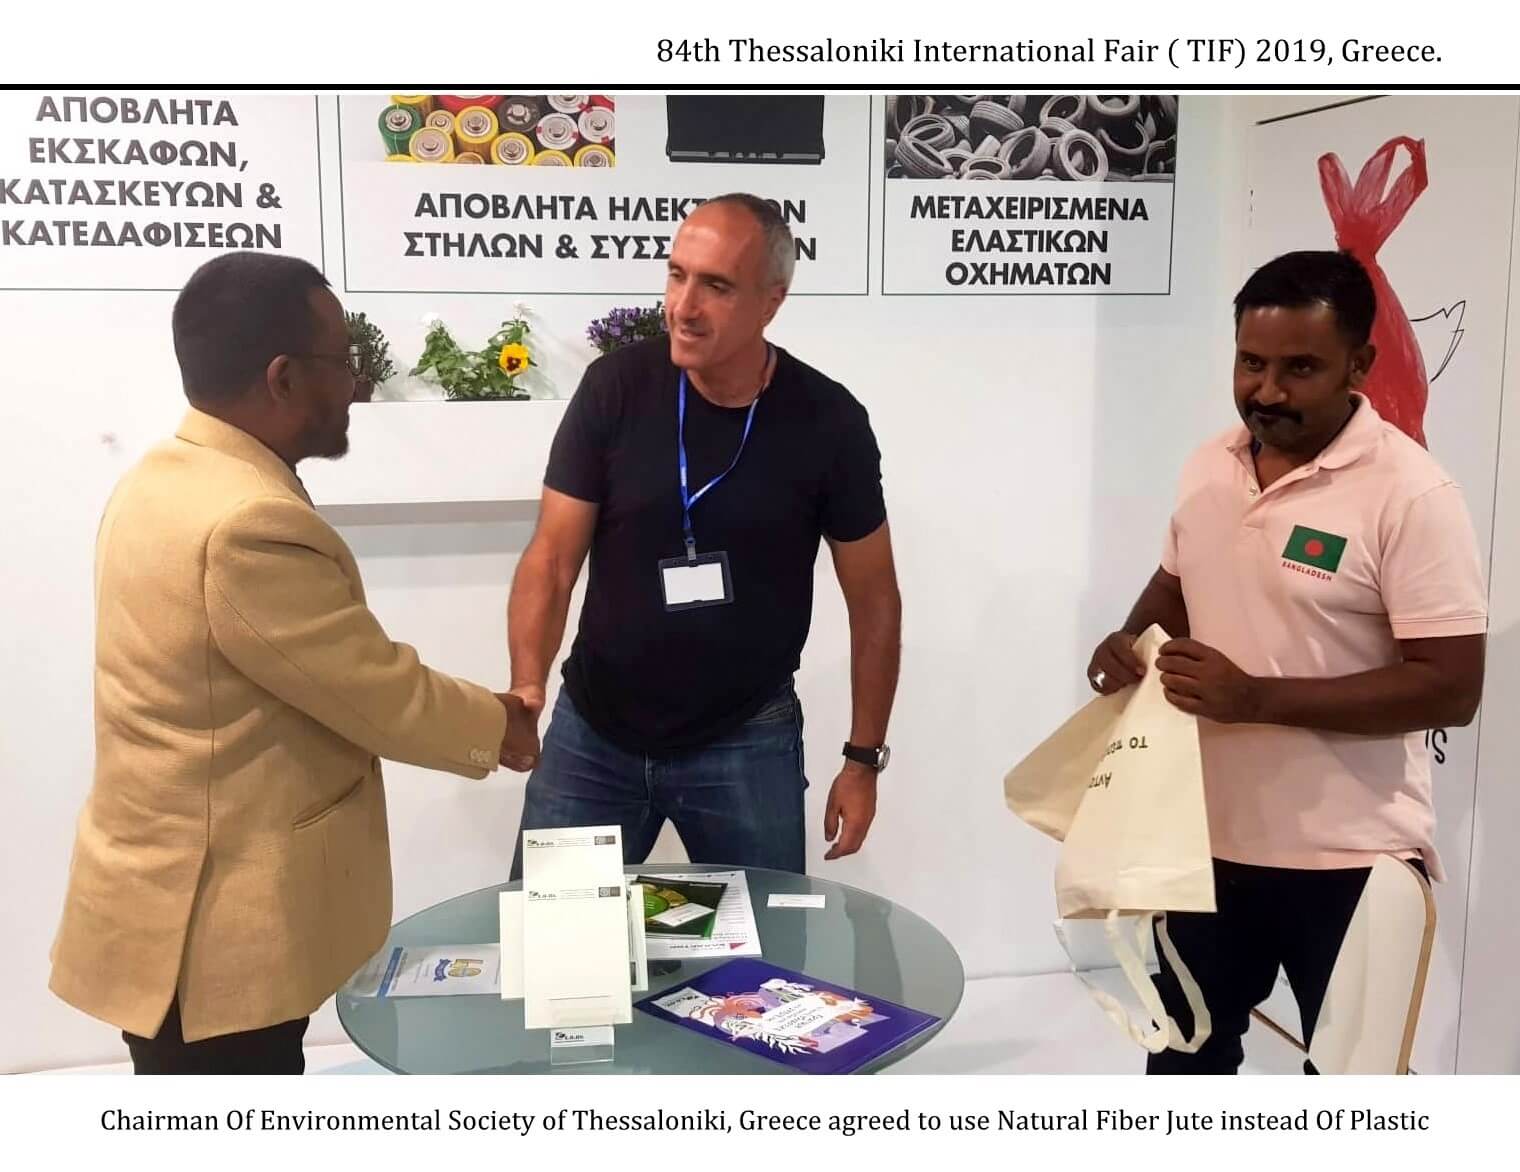 11.Chairman Of Environmental Society of Thessaloniki, Greece agree to use Natural Fiber Jute instead Of Plastic